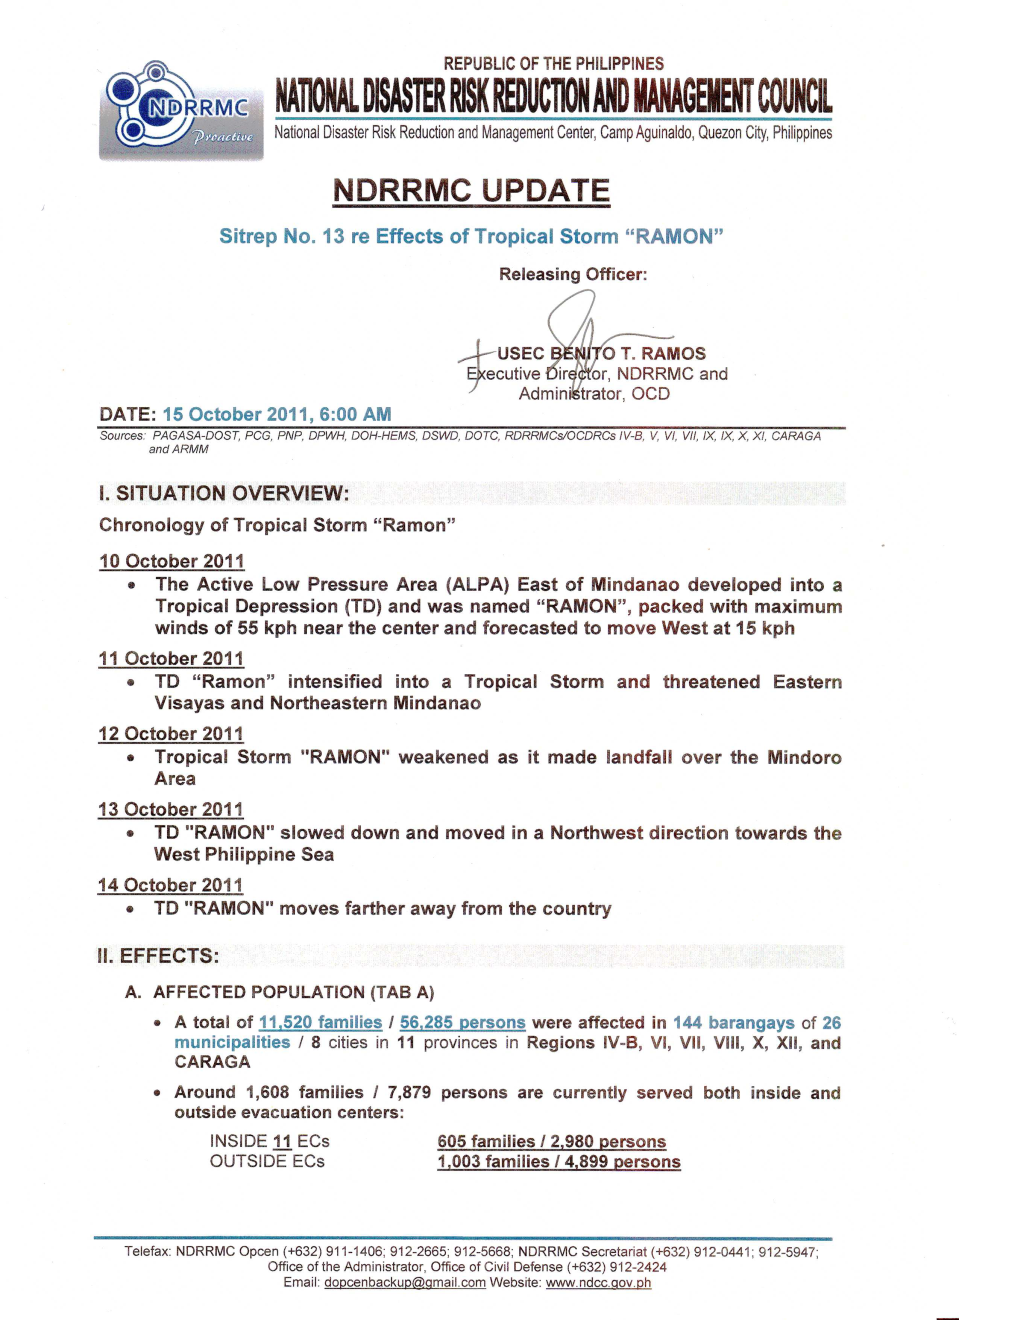 NDRRMC Update Sitrep No. 13 Re Effects of Tropical Storm RAMON